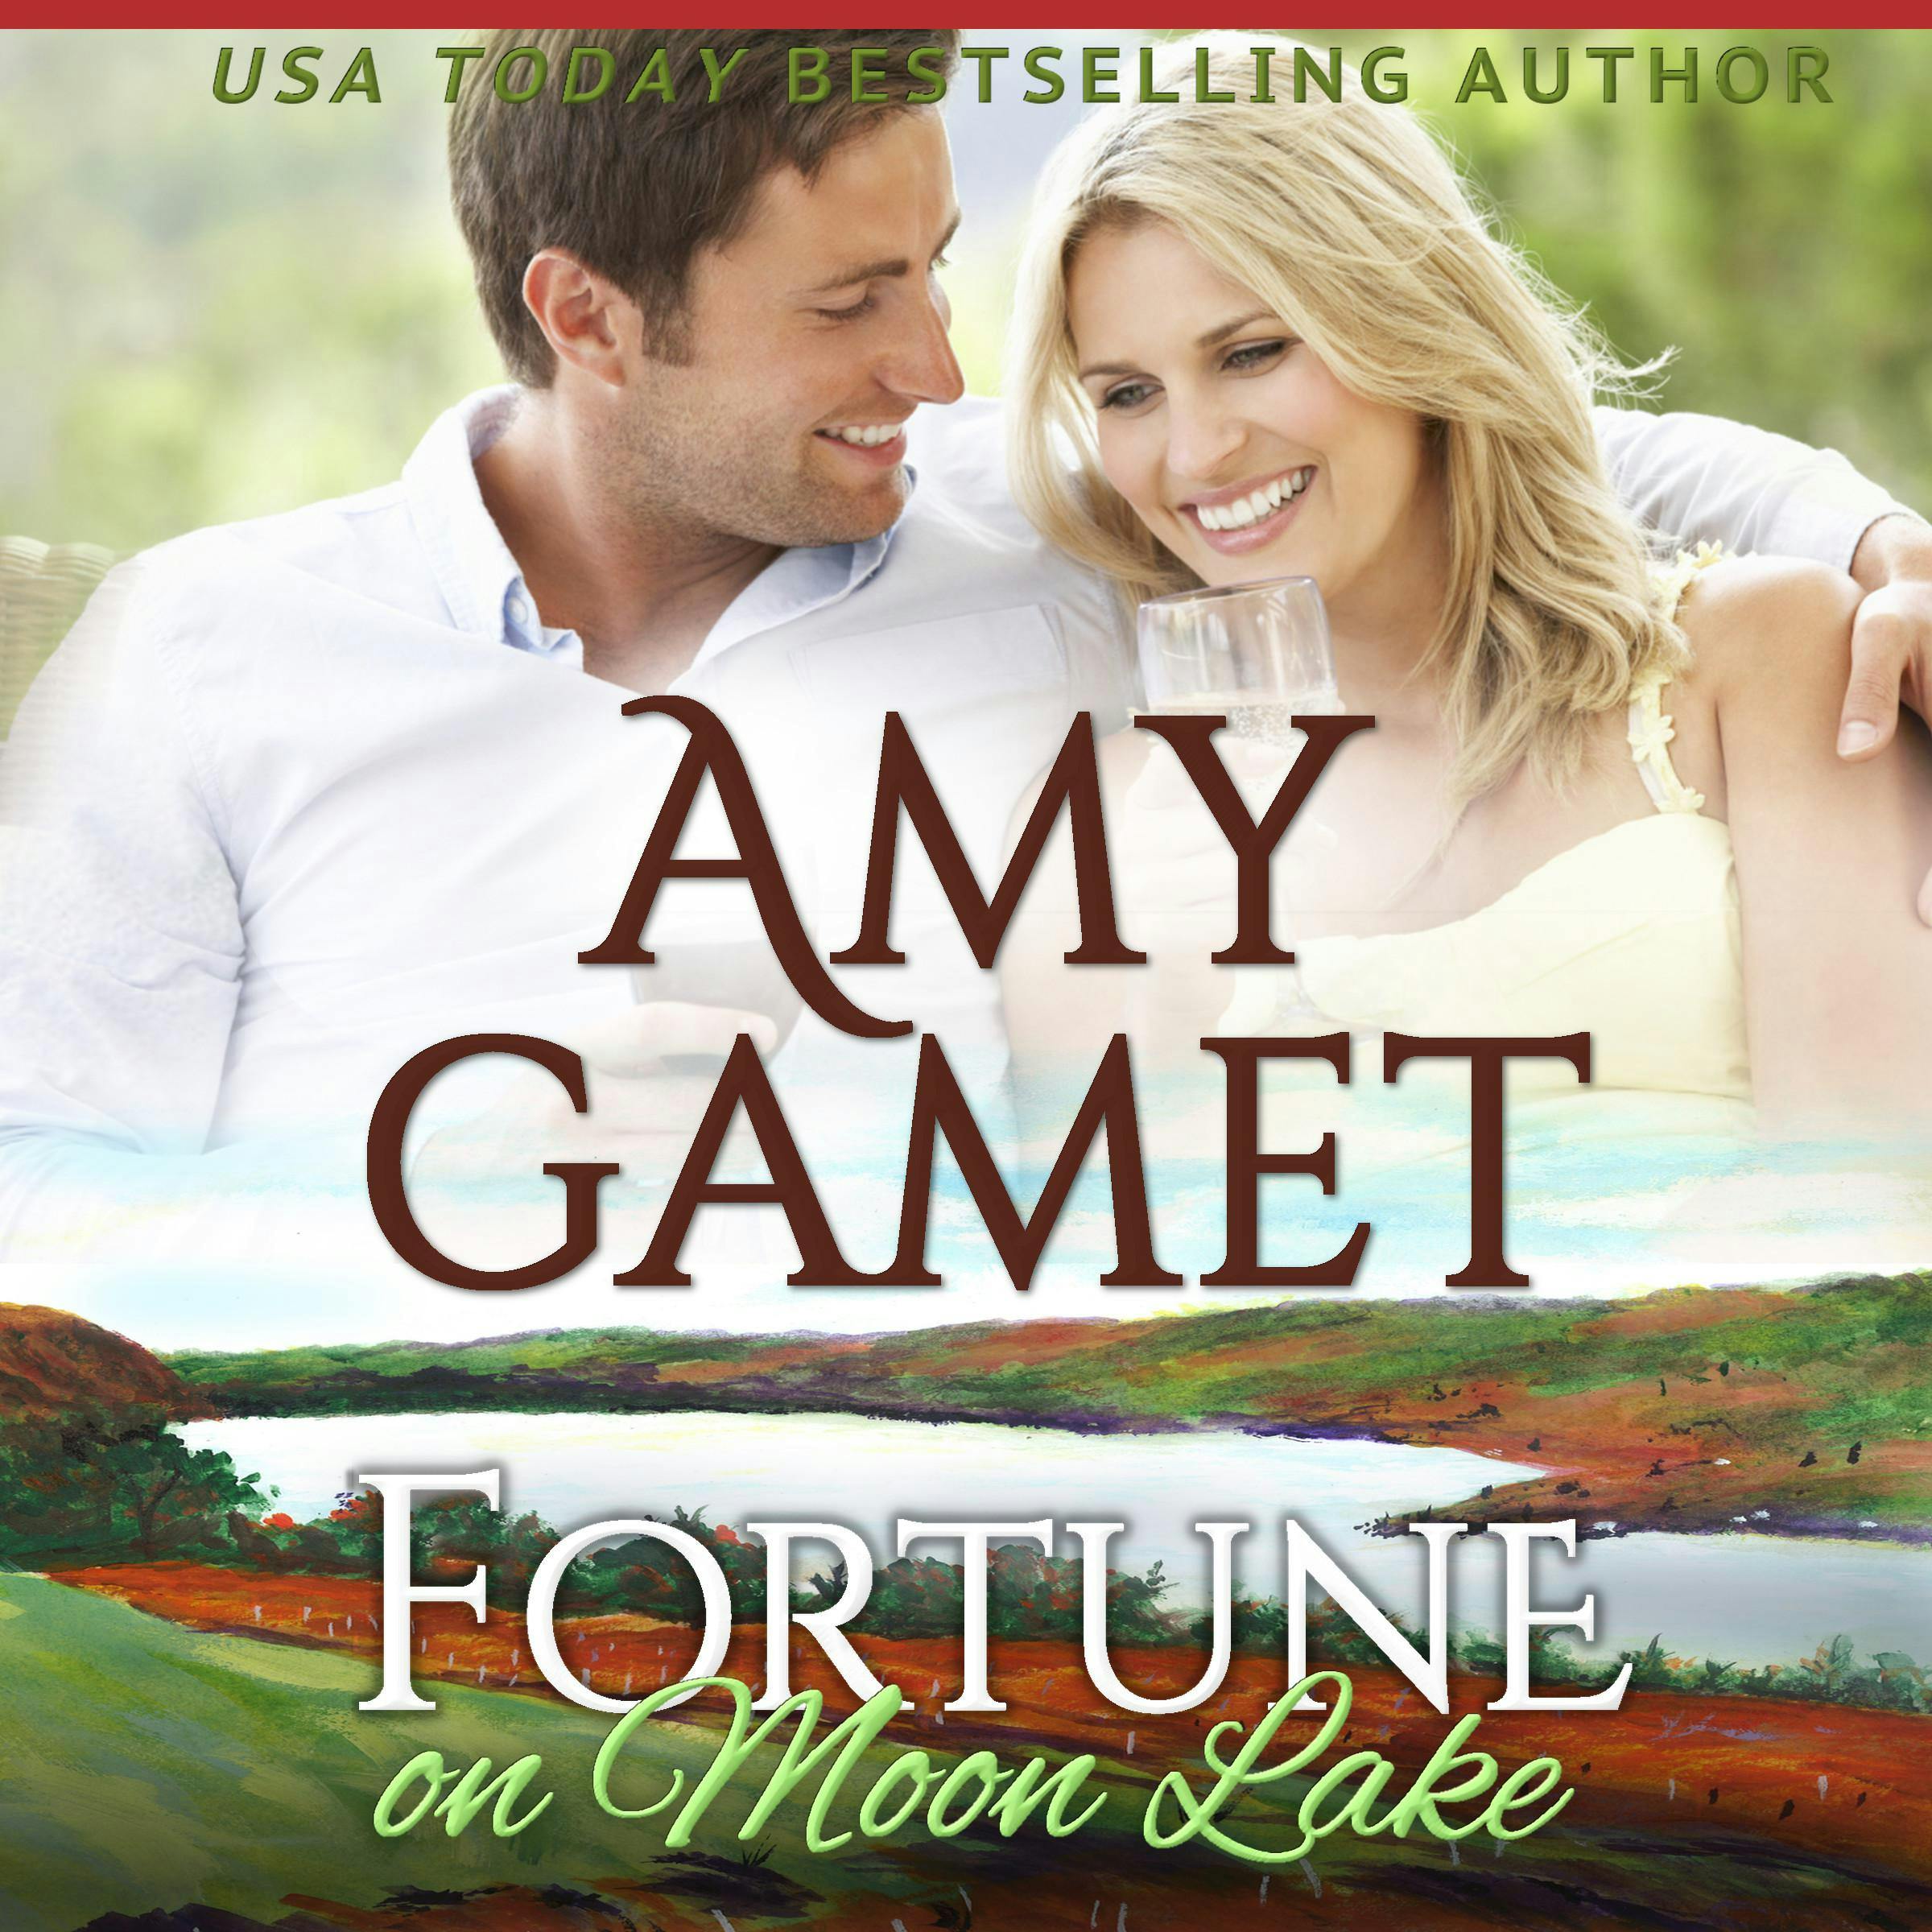 Fortune on Moon Lake - Amy Gamet